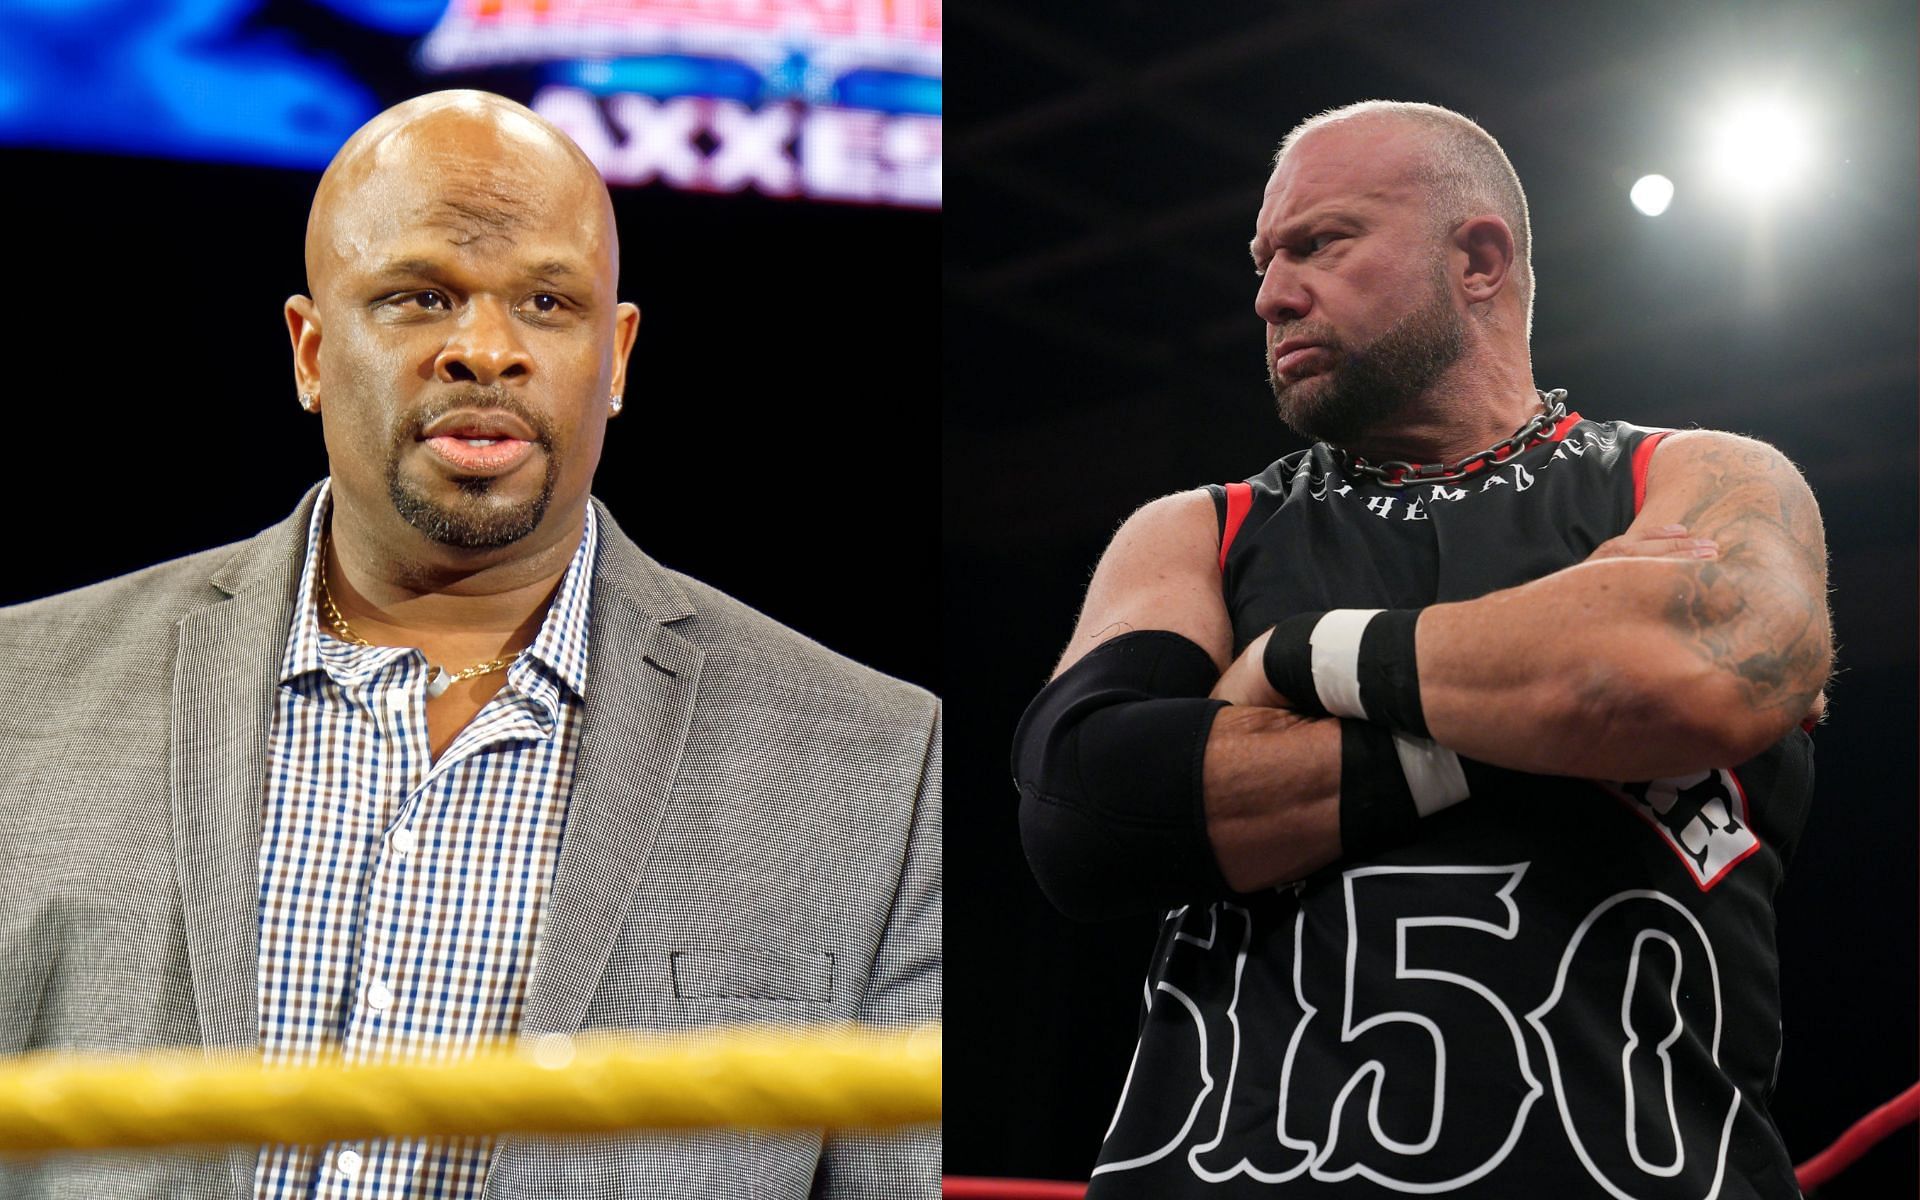 D-Von Dudley and Bully Ray formed one of the greatest tag teams of all time